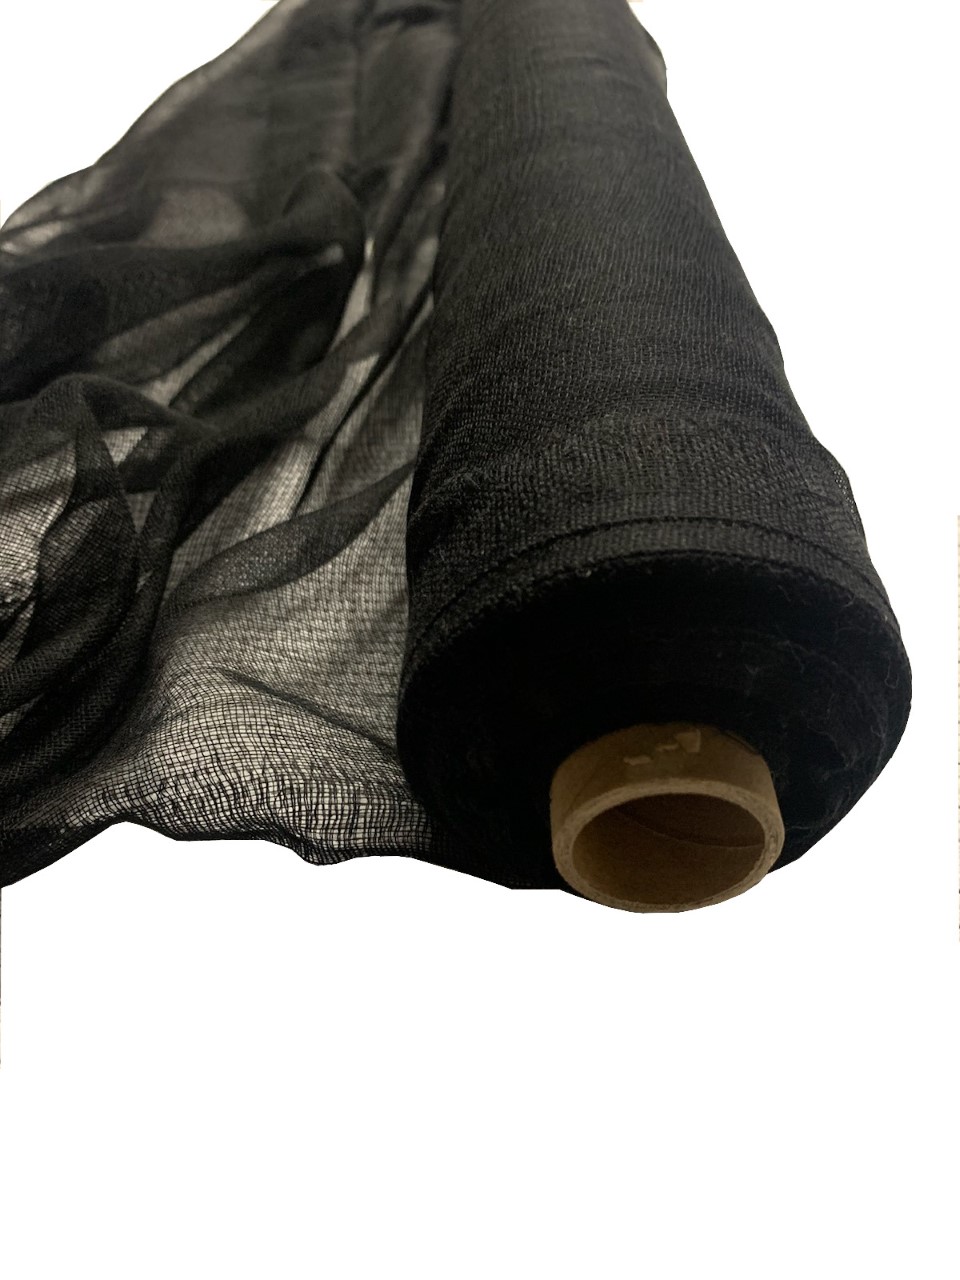 Black Cheesecloth 36" x 100 Foot Roll - 100% Cotton